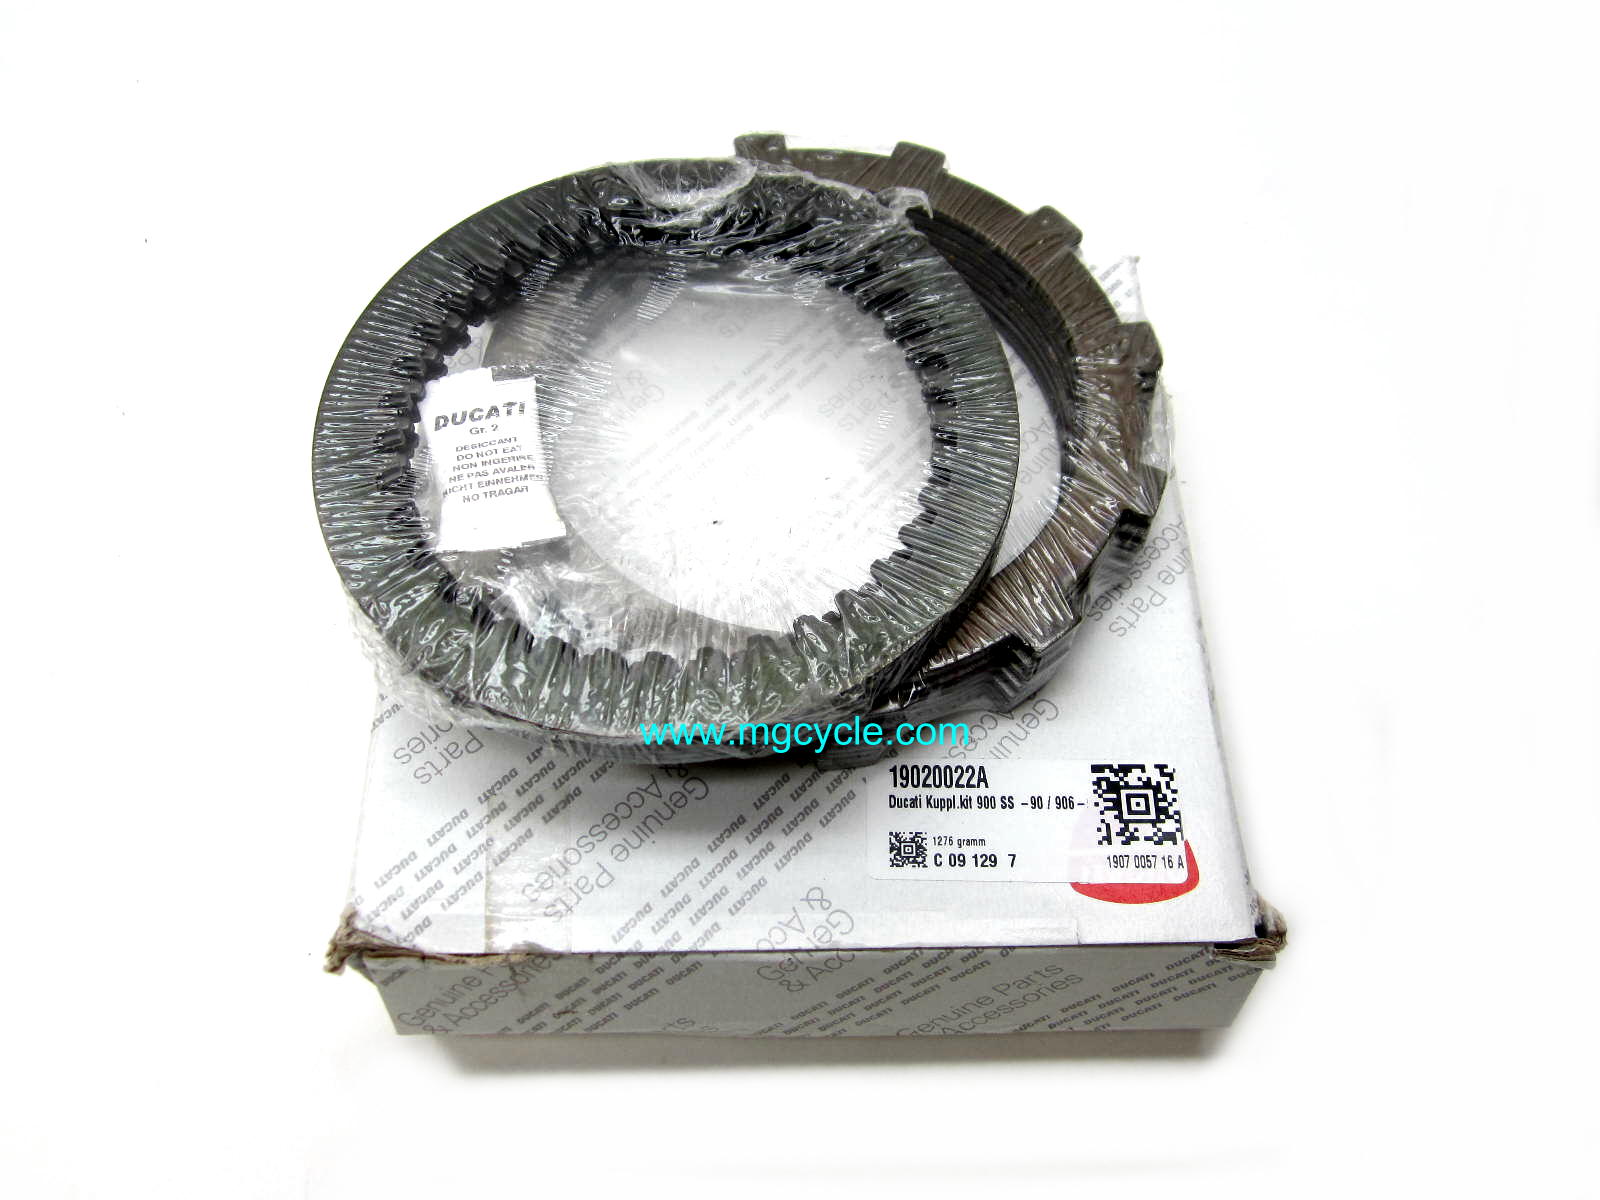 OEM Ducati clutch kit 750 / 907 Paso, 1991 750 SS F1, 851, 888 - Click Image to Close